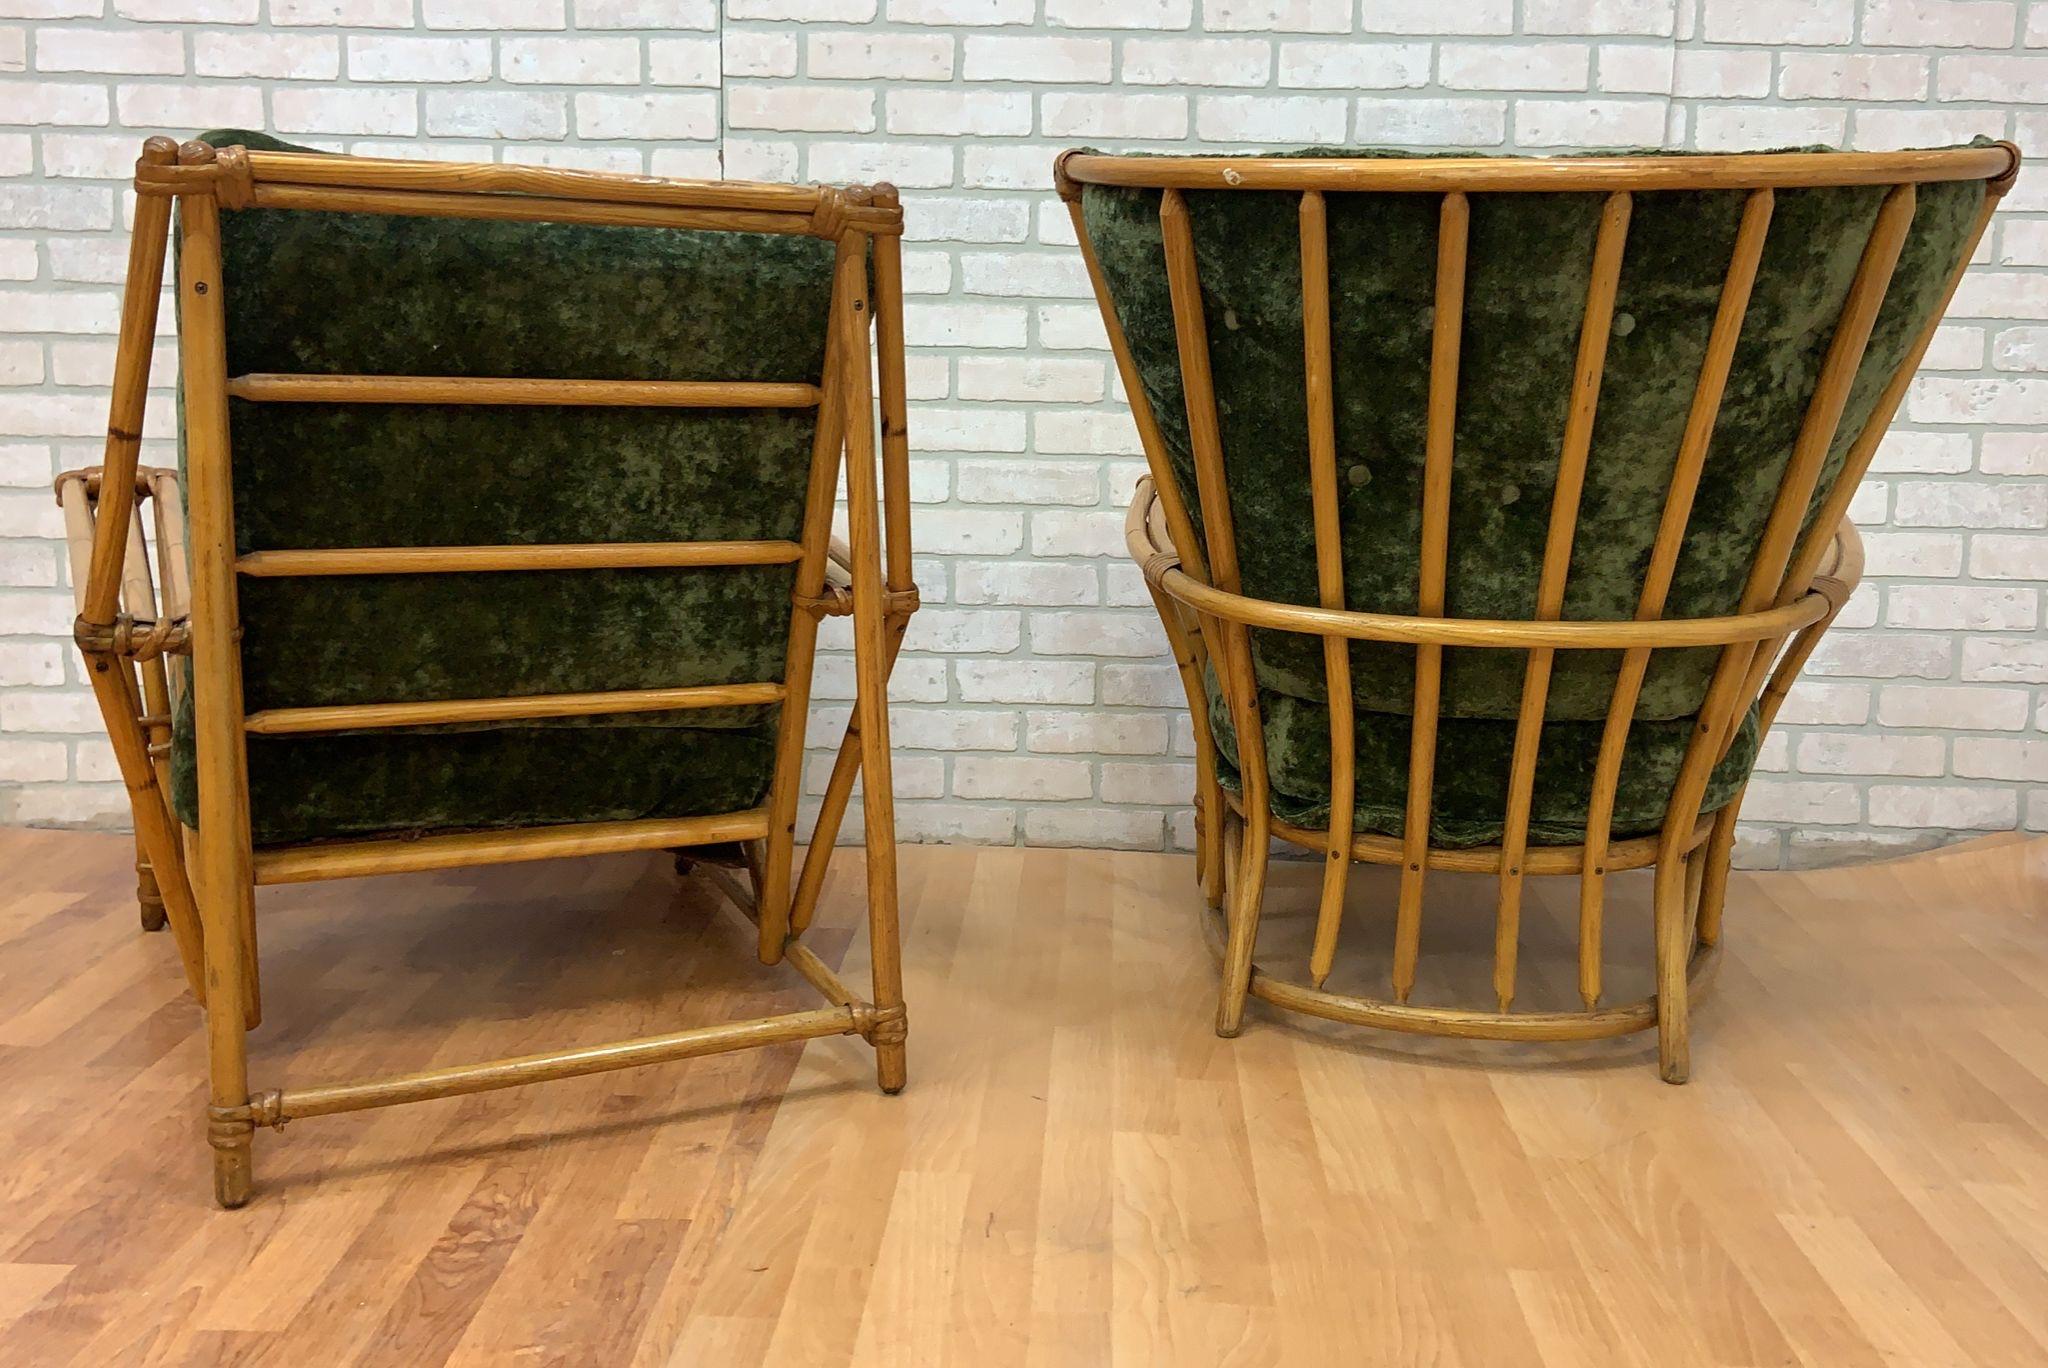 20th Century MCM Heywood Wakefield Ashcraft Rattan Lounge Chairs Newly Upholstered - Set of 2 For Sale